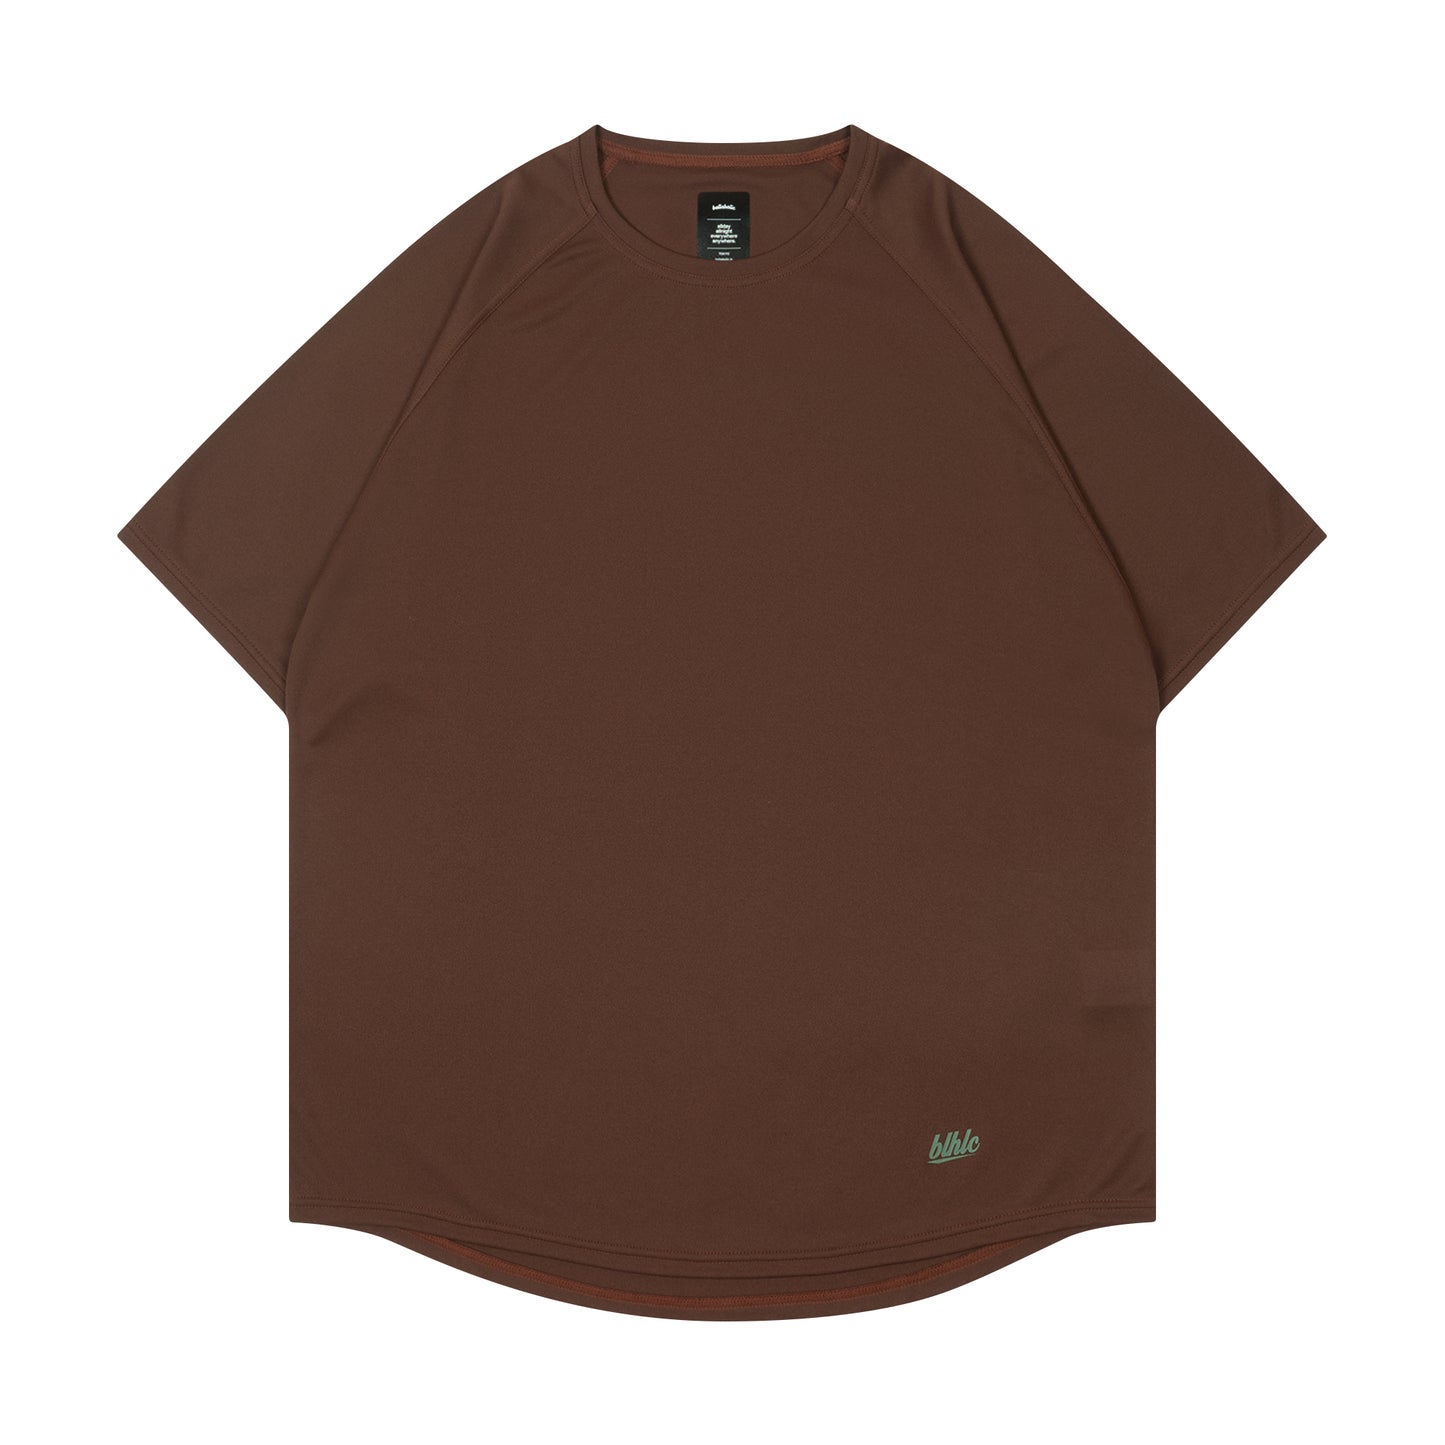 blhlc Back Print Cool Tee (brown/north)